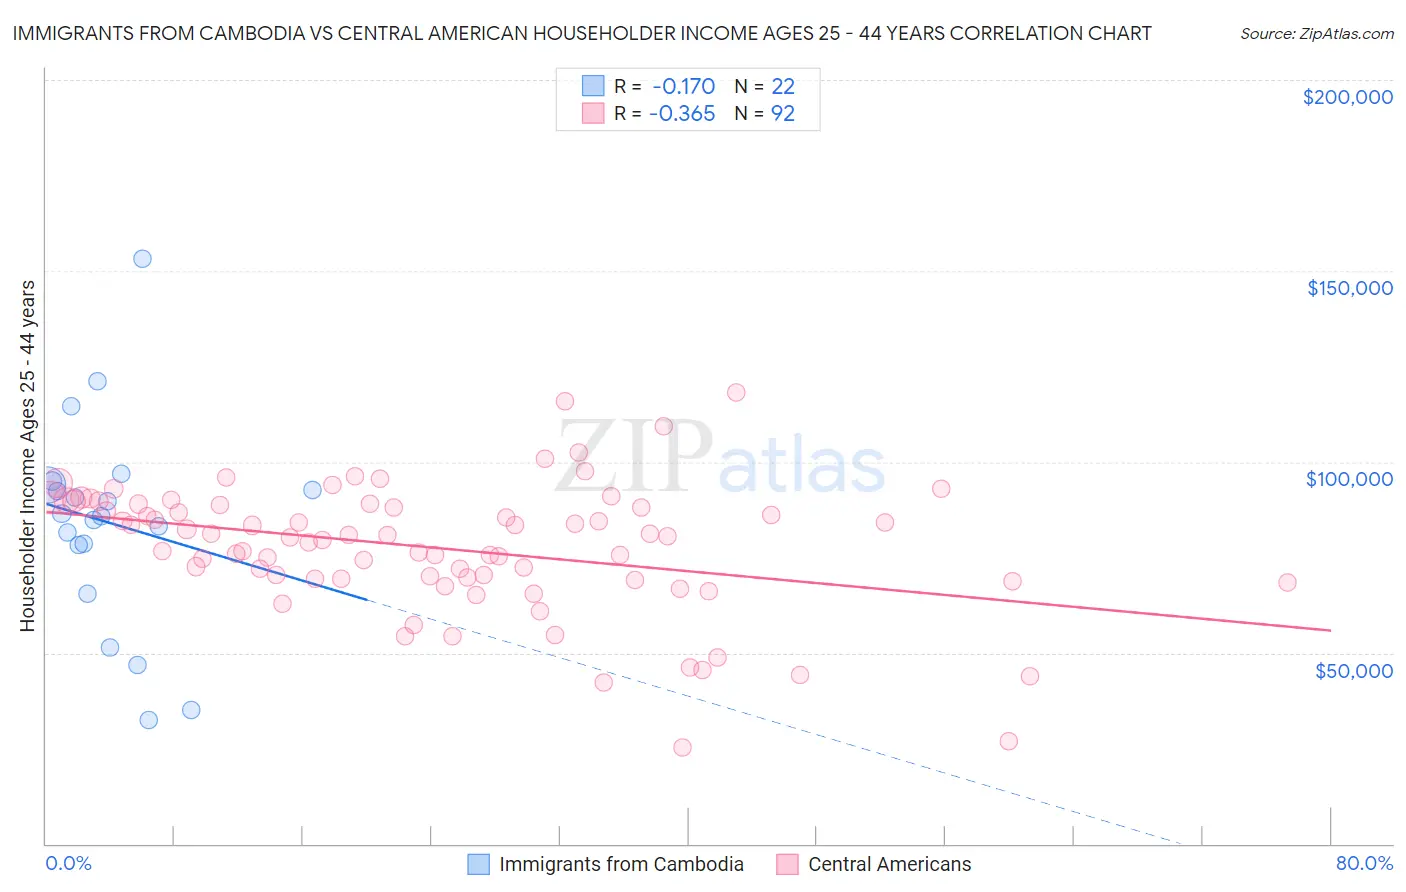 Immigrants from Cambodia vs Central American Householder Income Ages 25 - 44 years